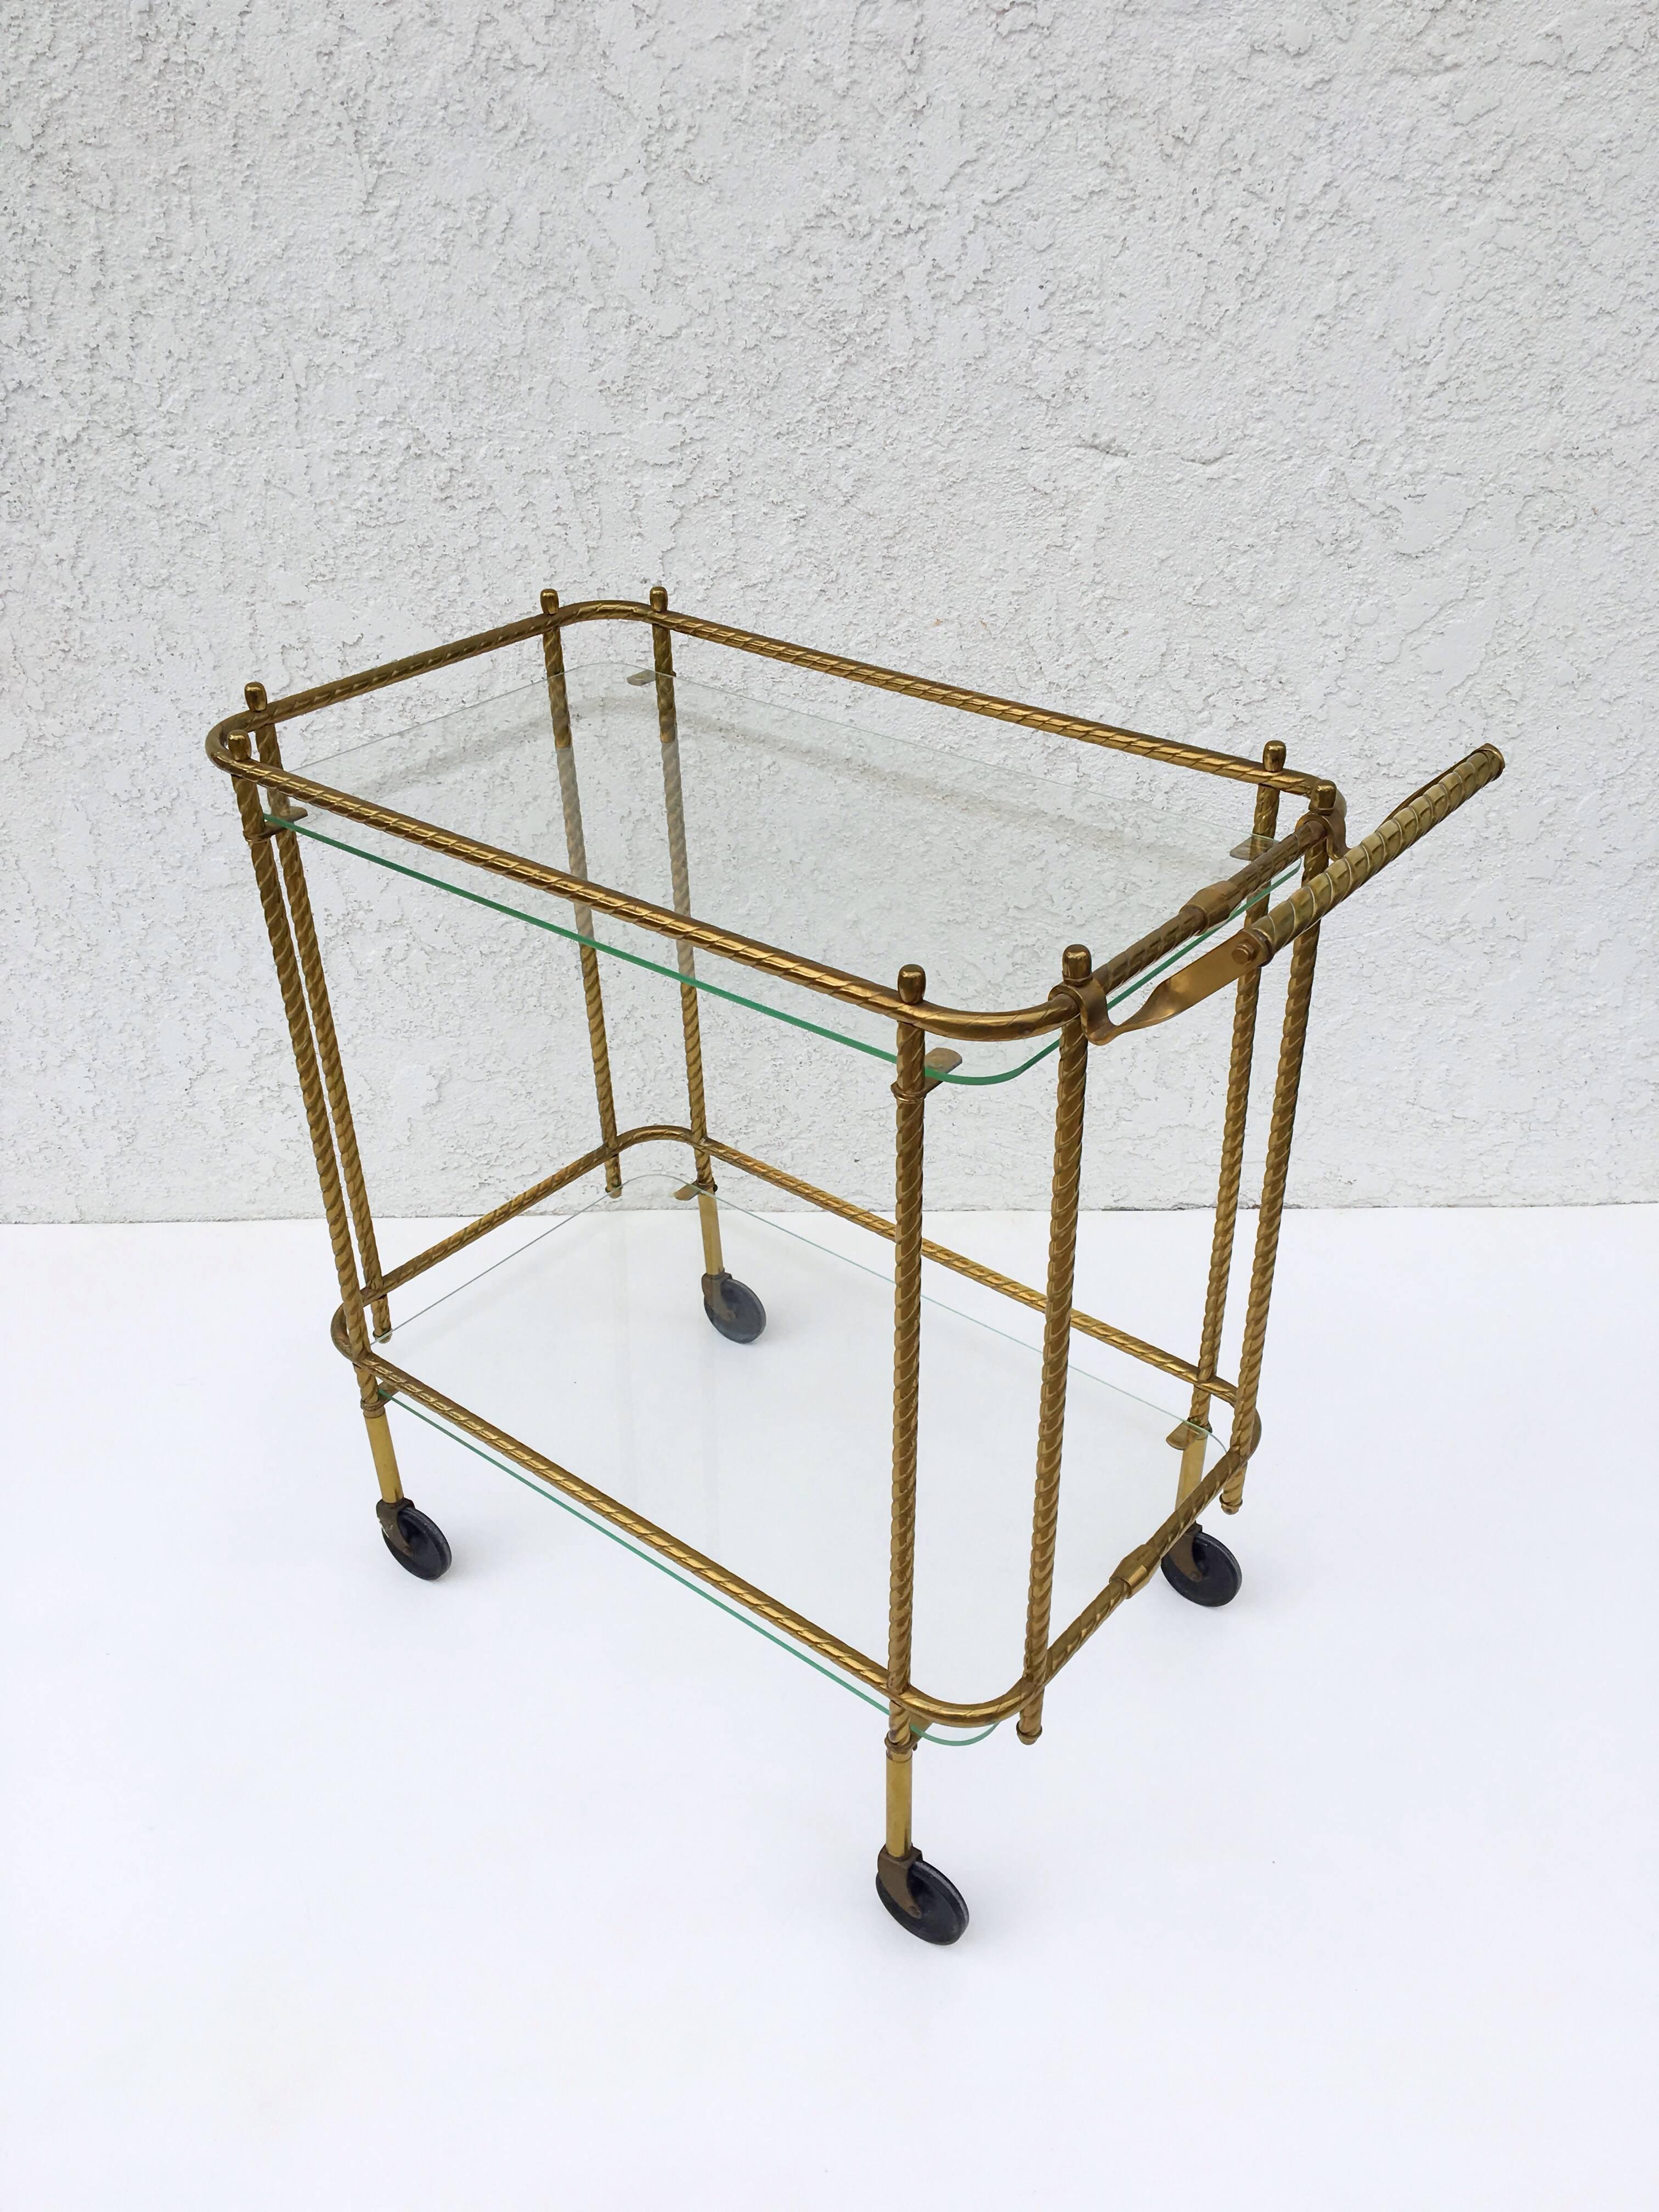 Aged brass and glass two-tier bar cart from 1970s.
The glass is 1/4